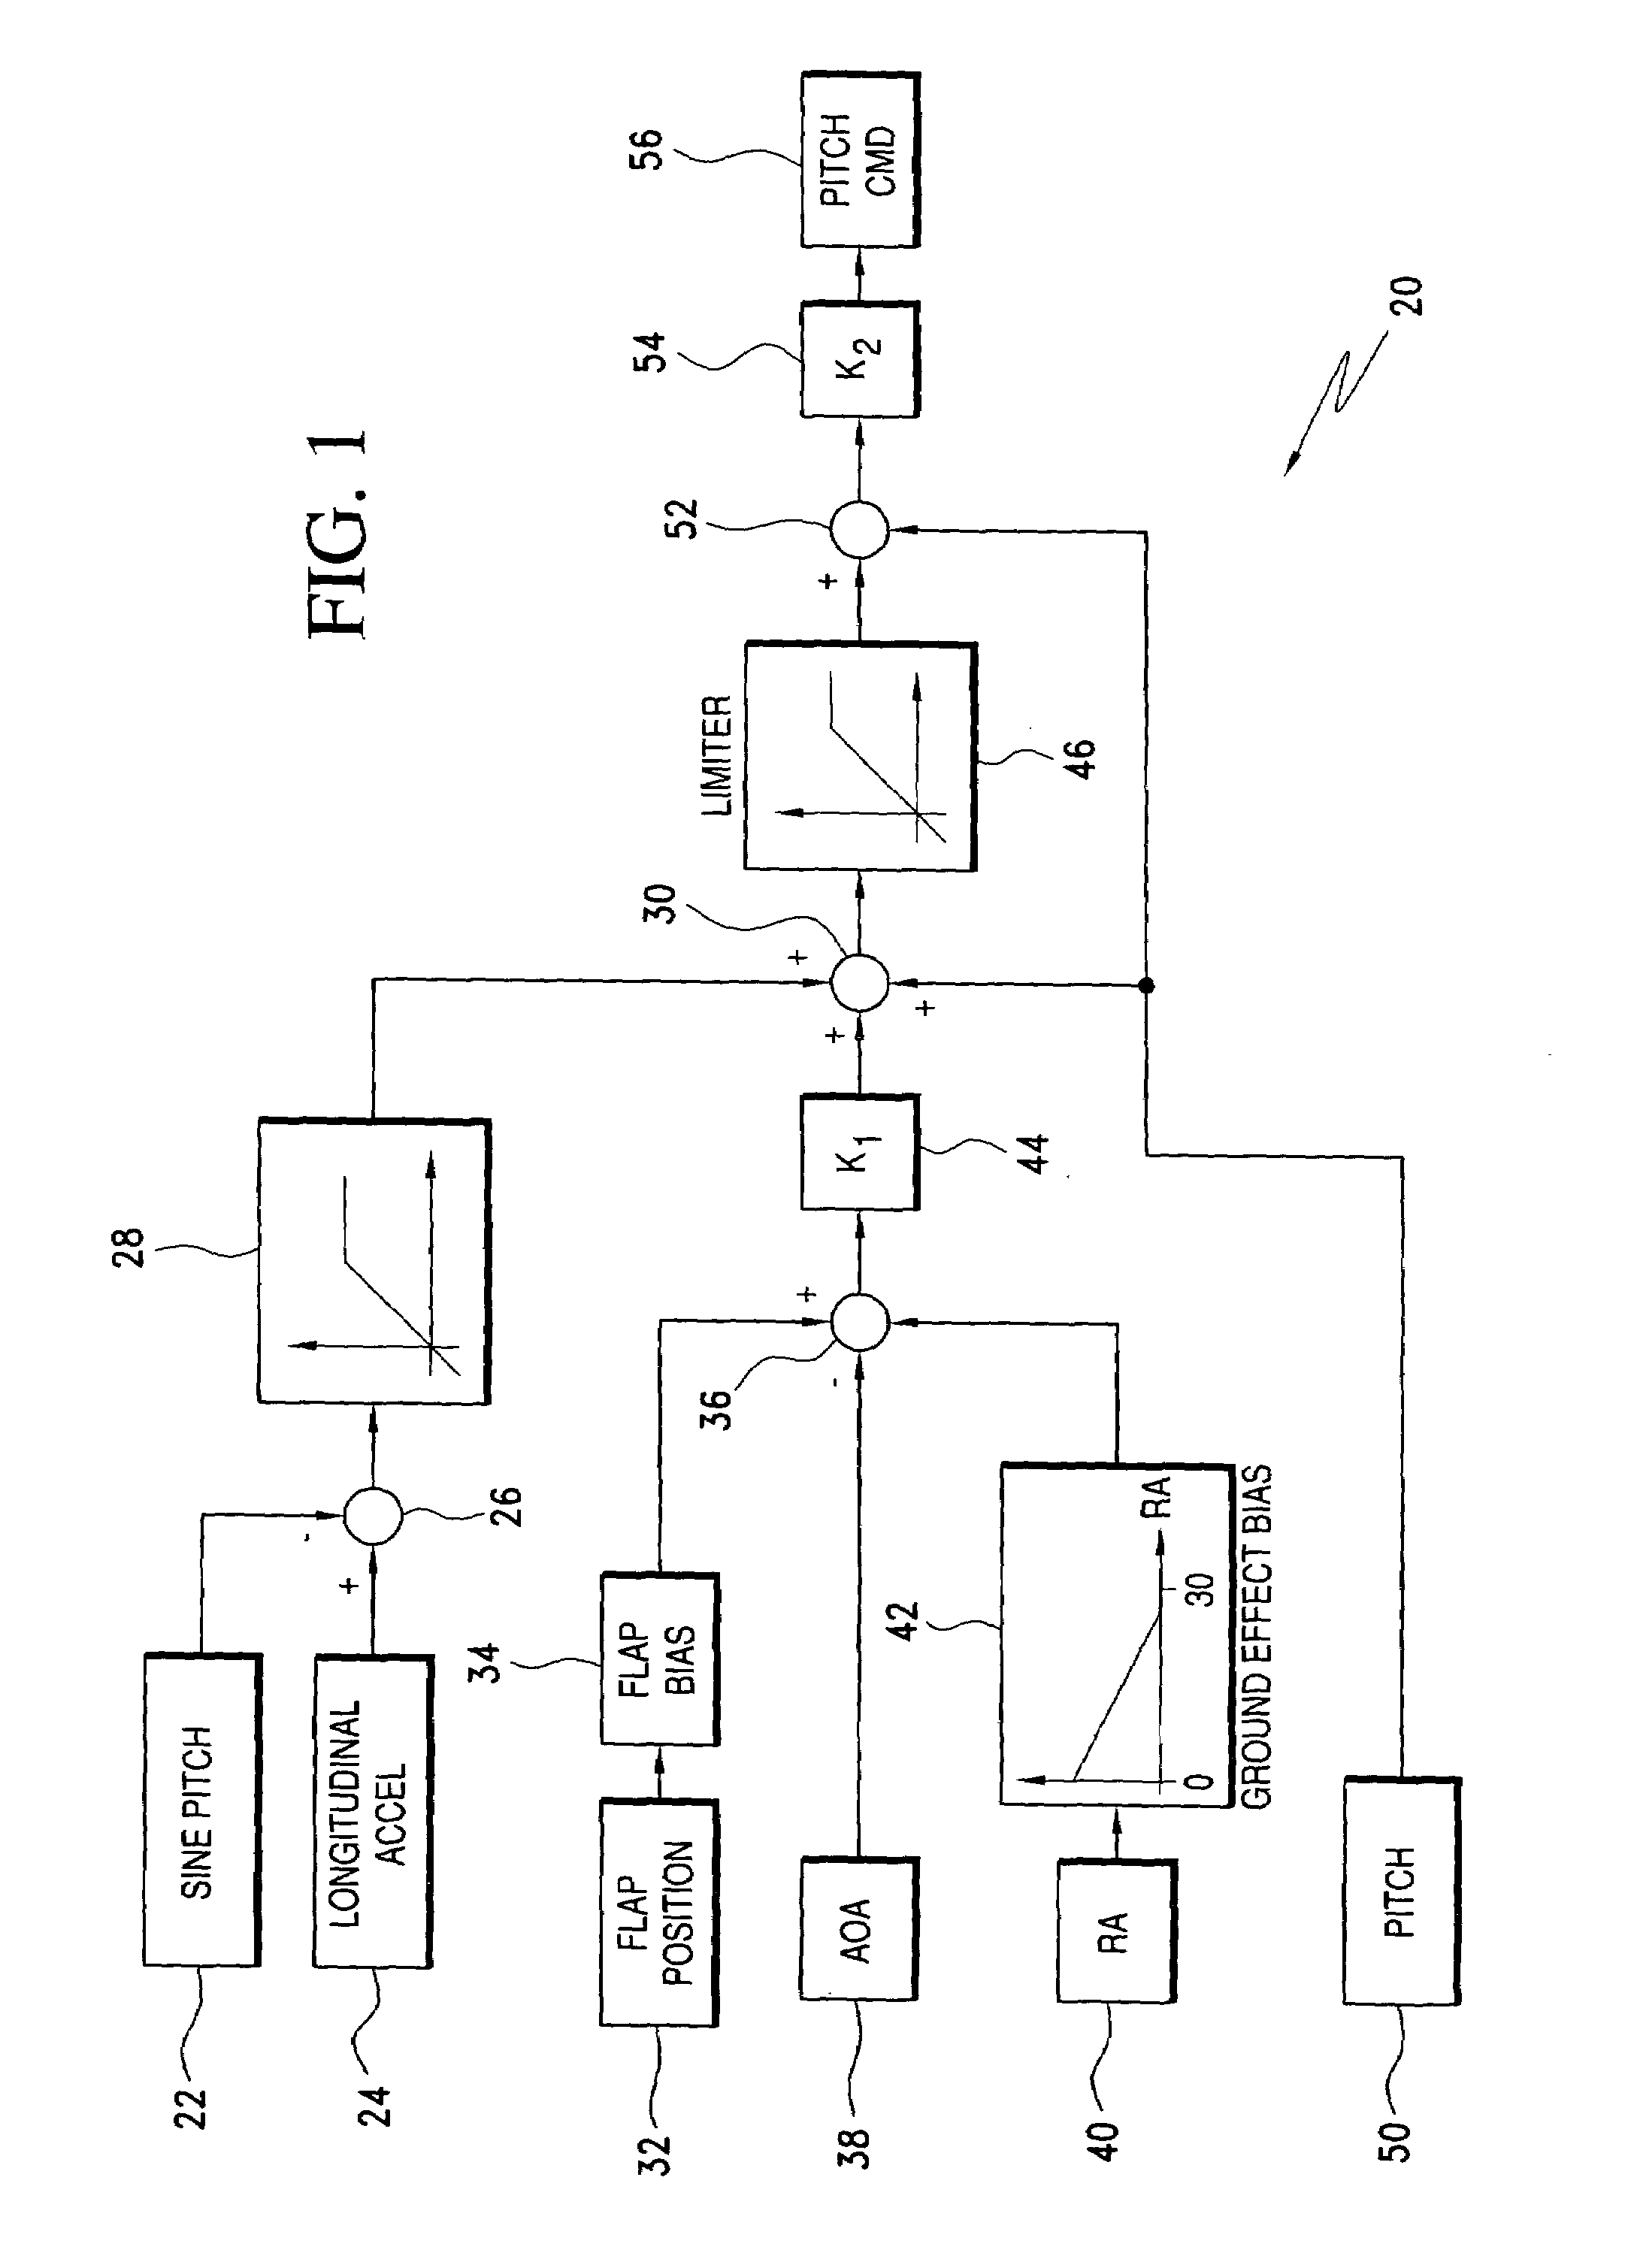 Ground effects compensated angle of attack command system and method